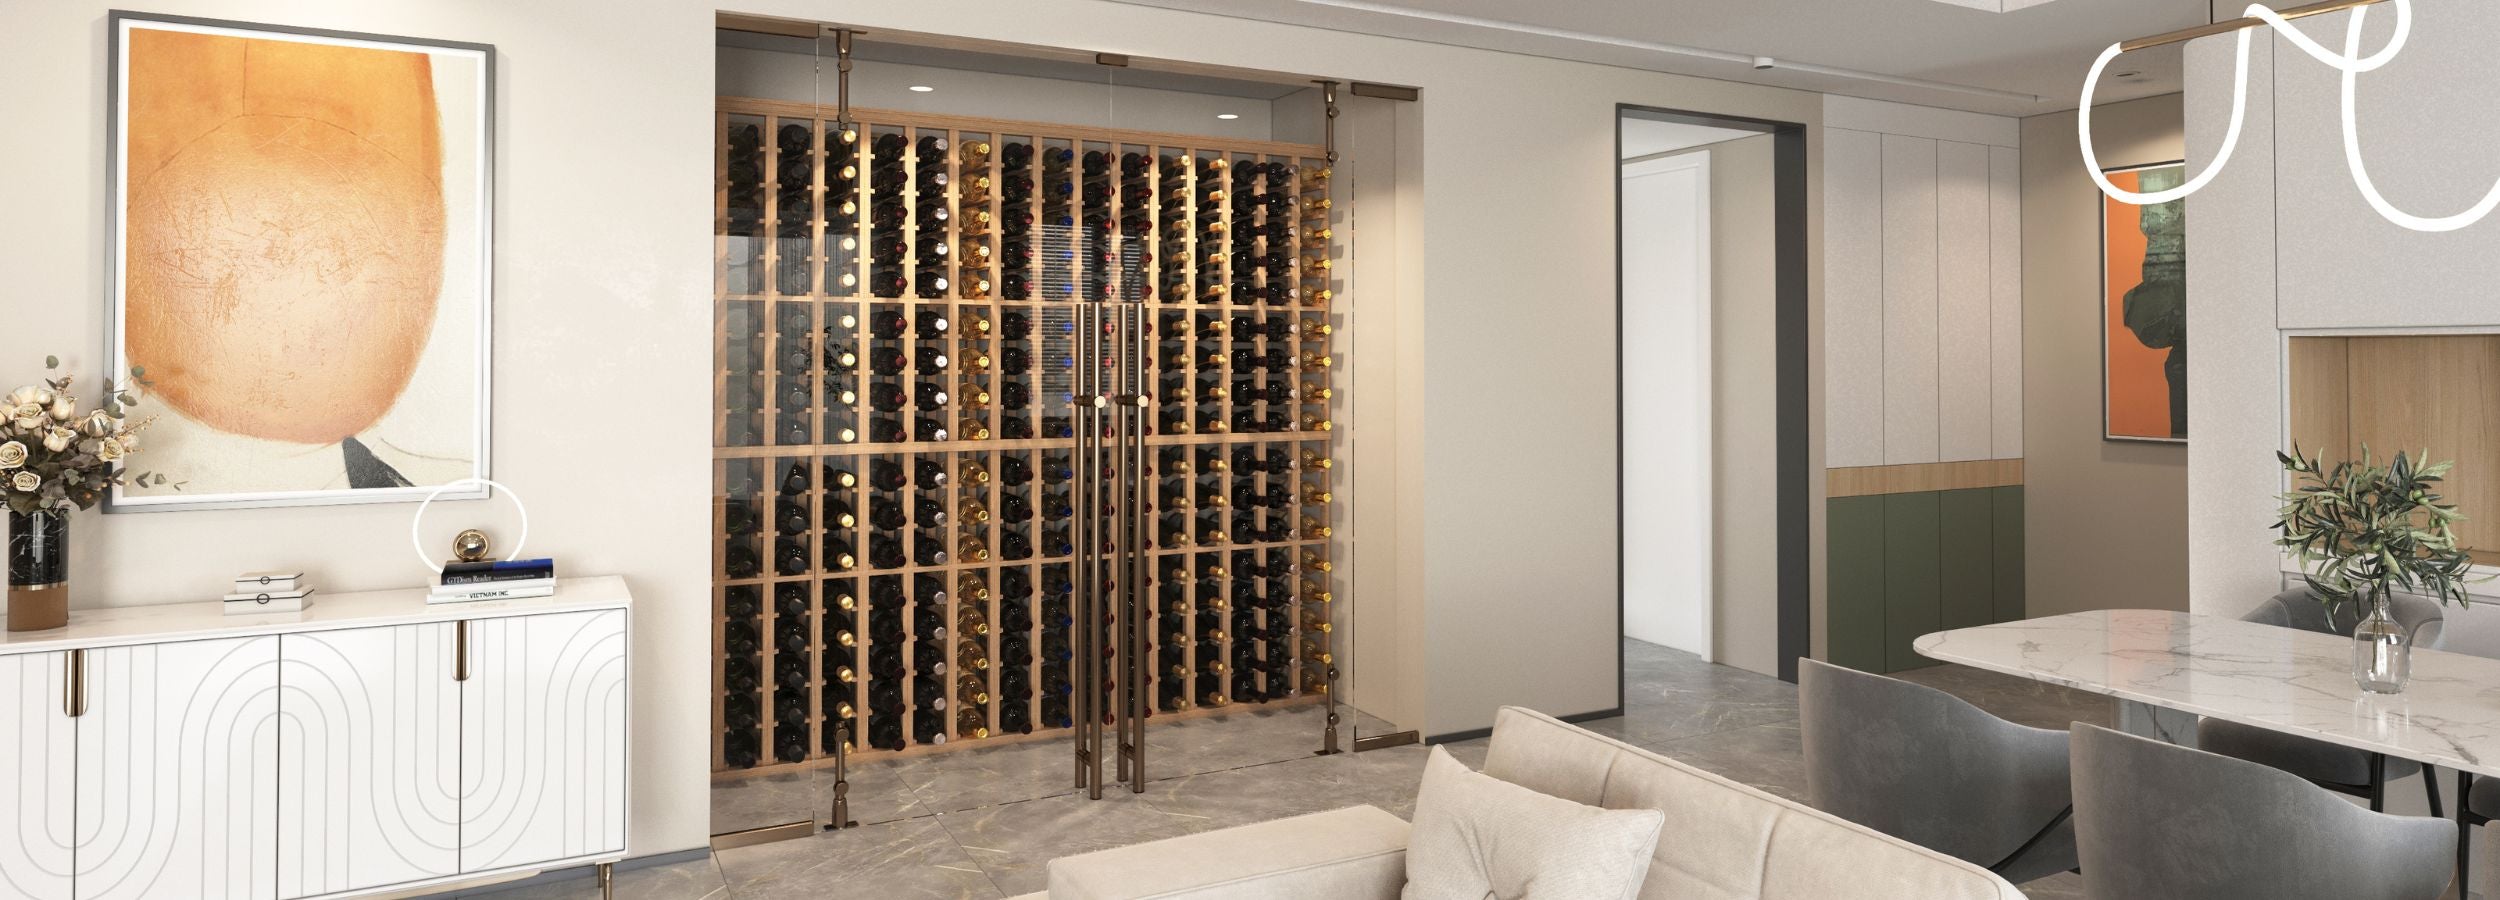 modern wine wall with cooling unit - design by Genuwine Cellars